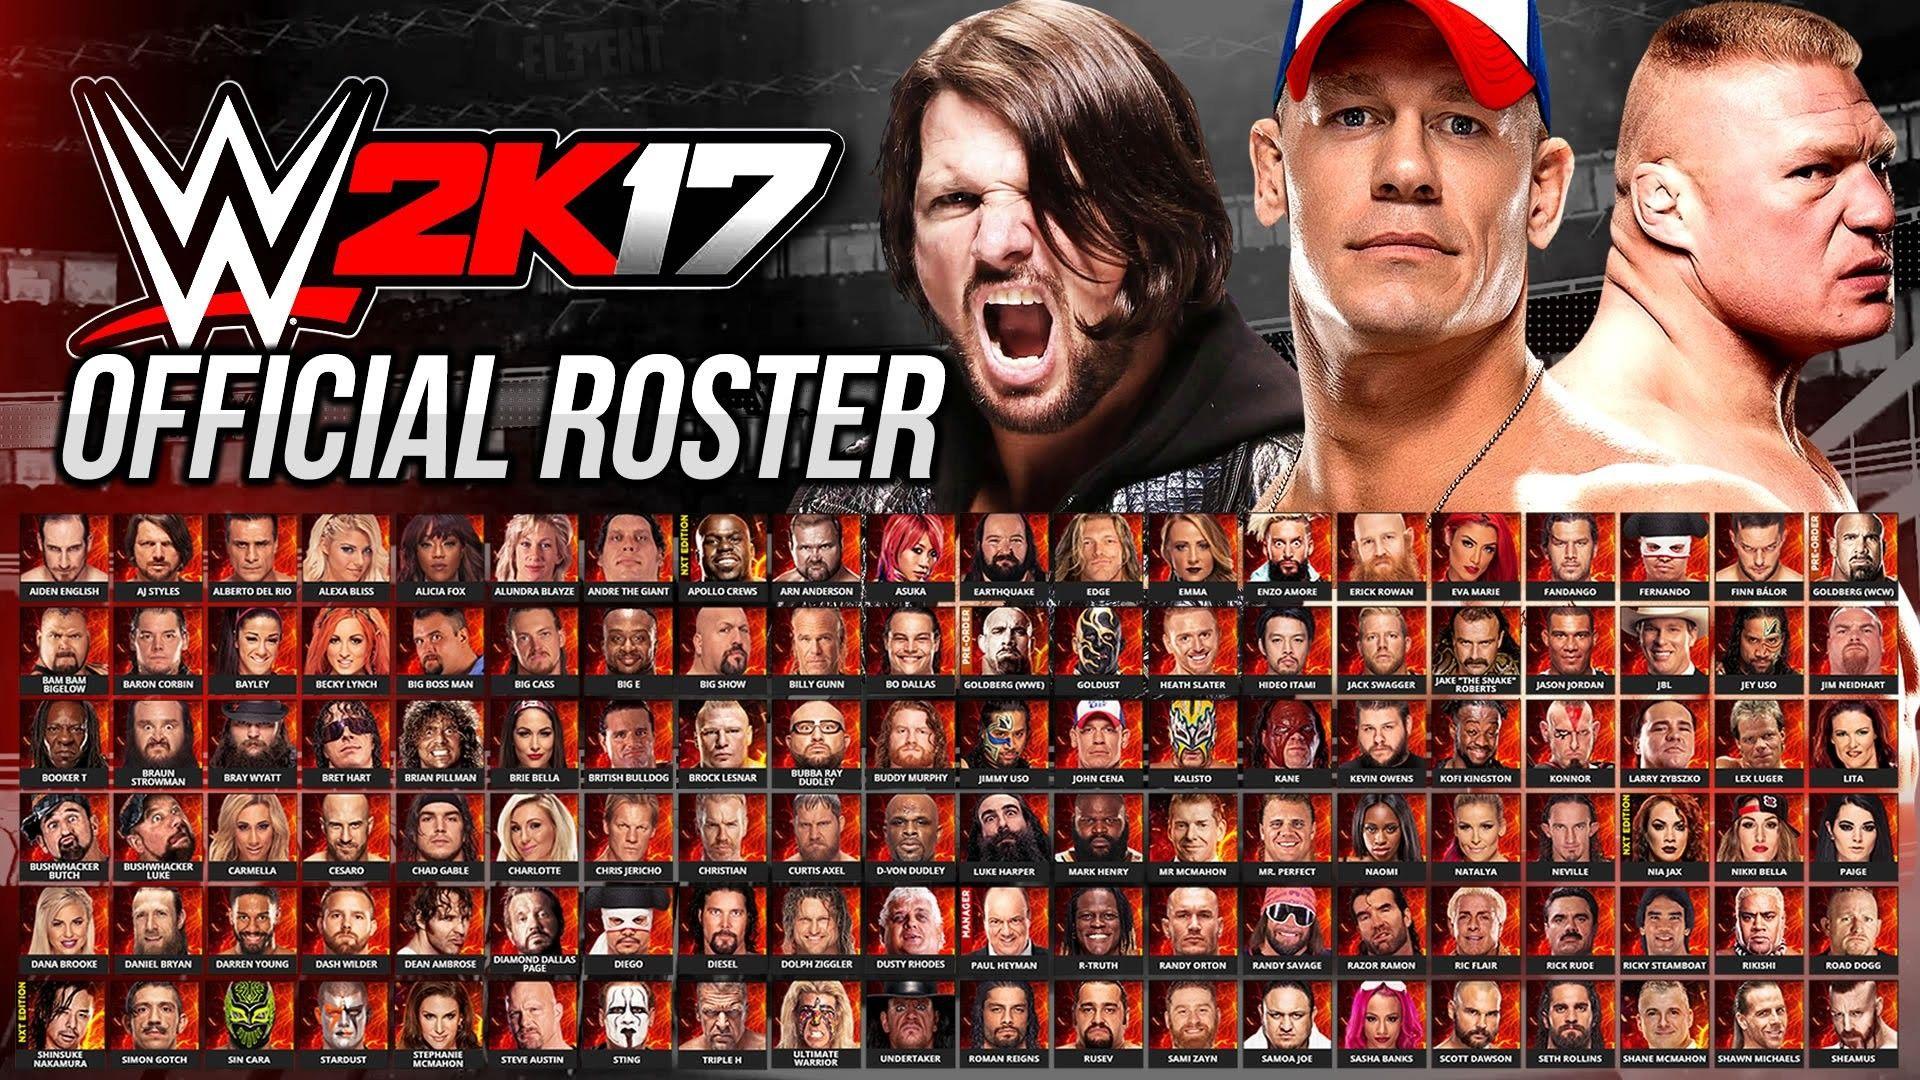 WWE 2K17 wallpaper best HD. WWE 2K17 wallpaper HD. Wwe, Wwe game